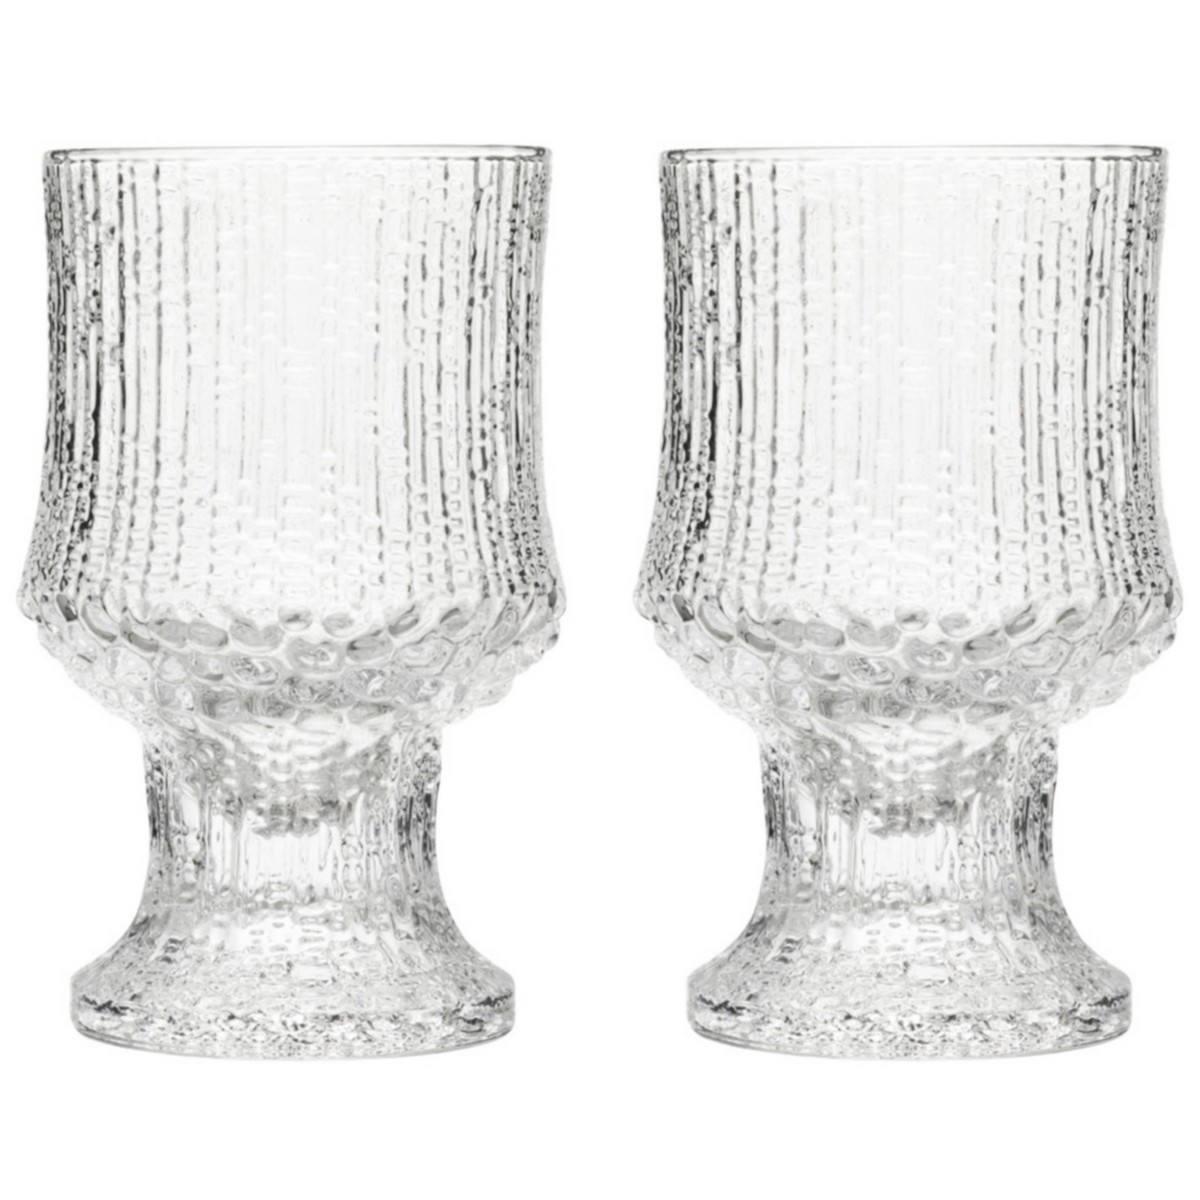 23cl - 2 x Ultima Thule red wine glass